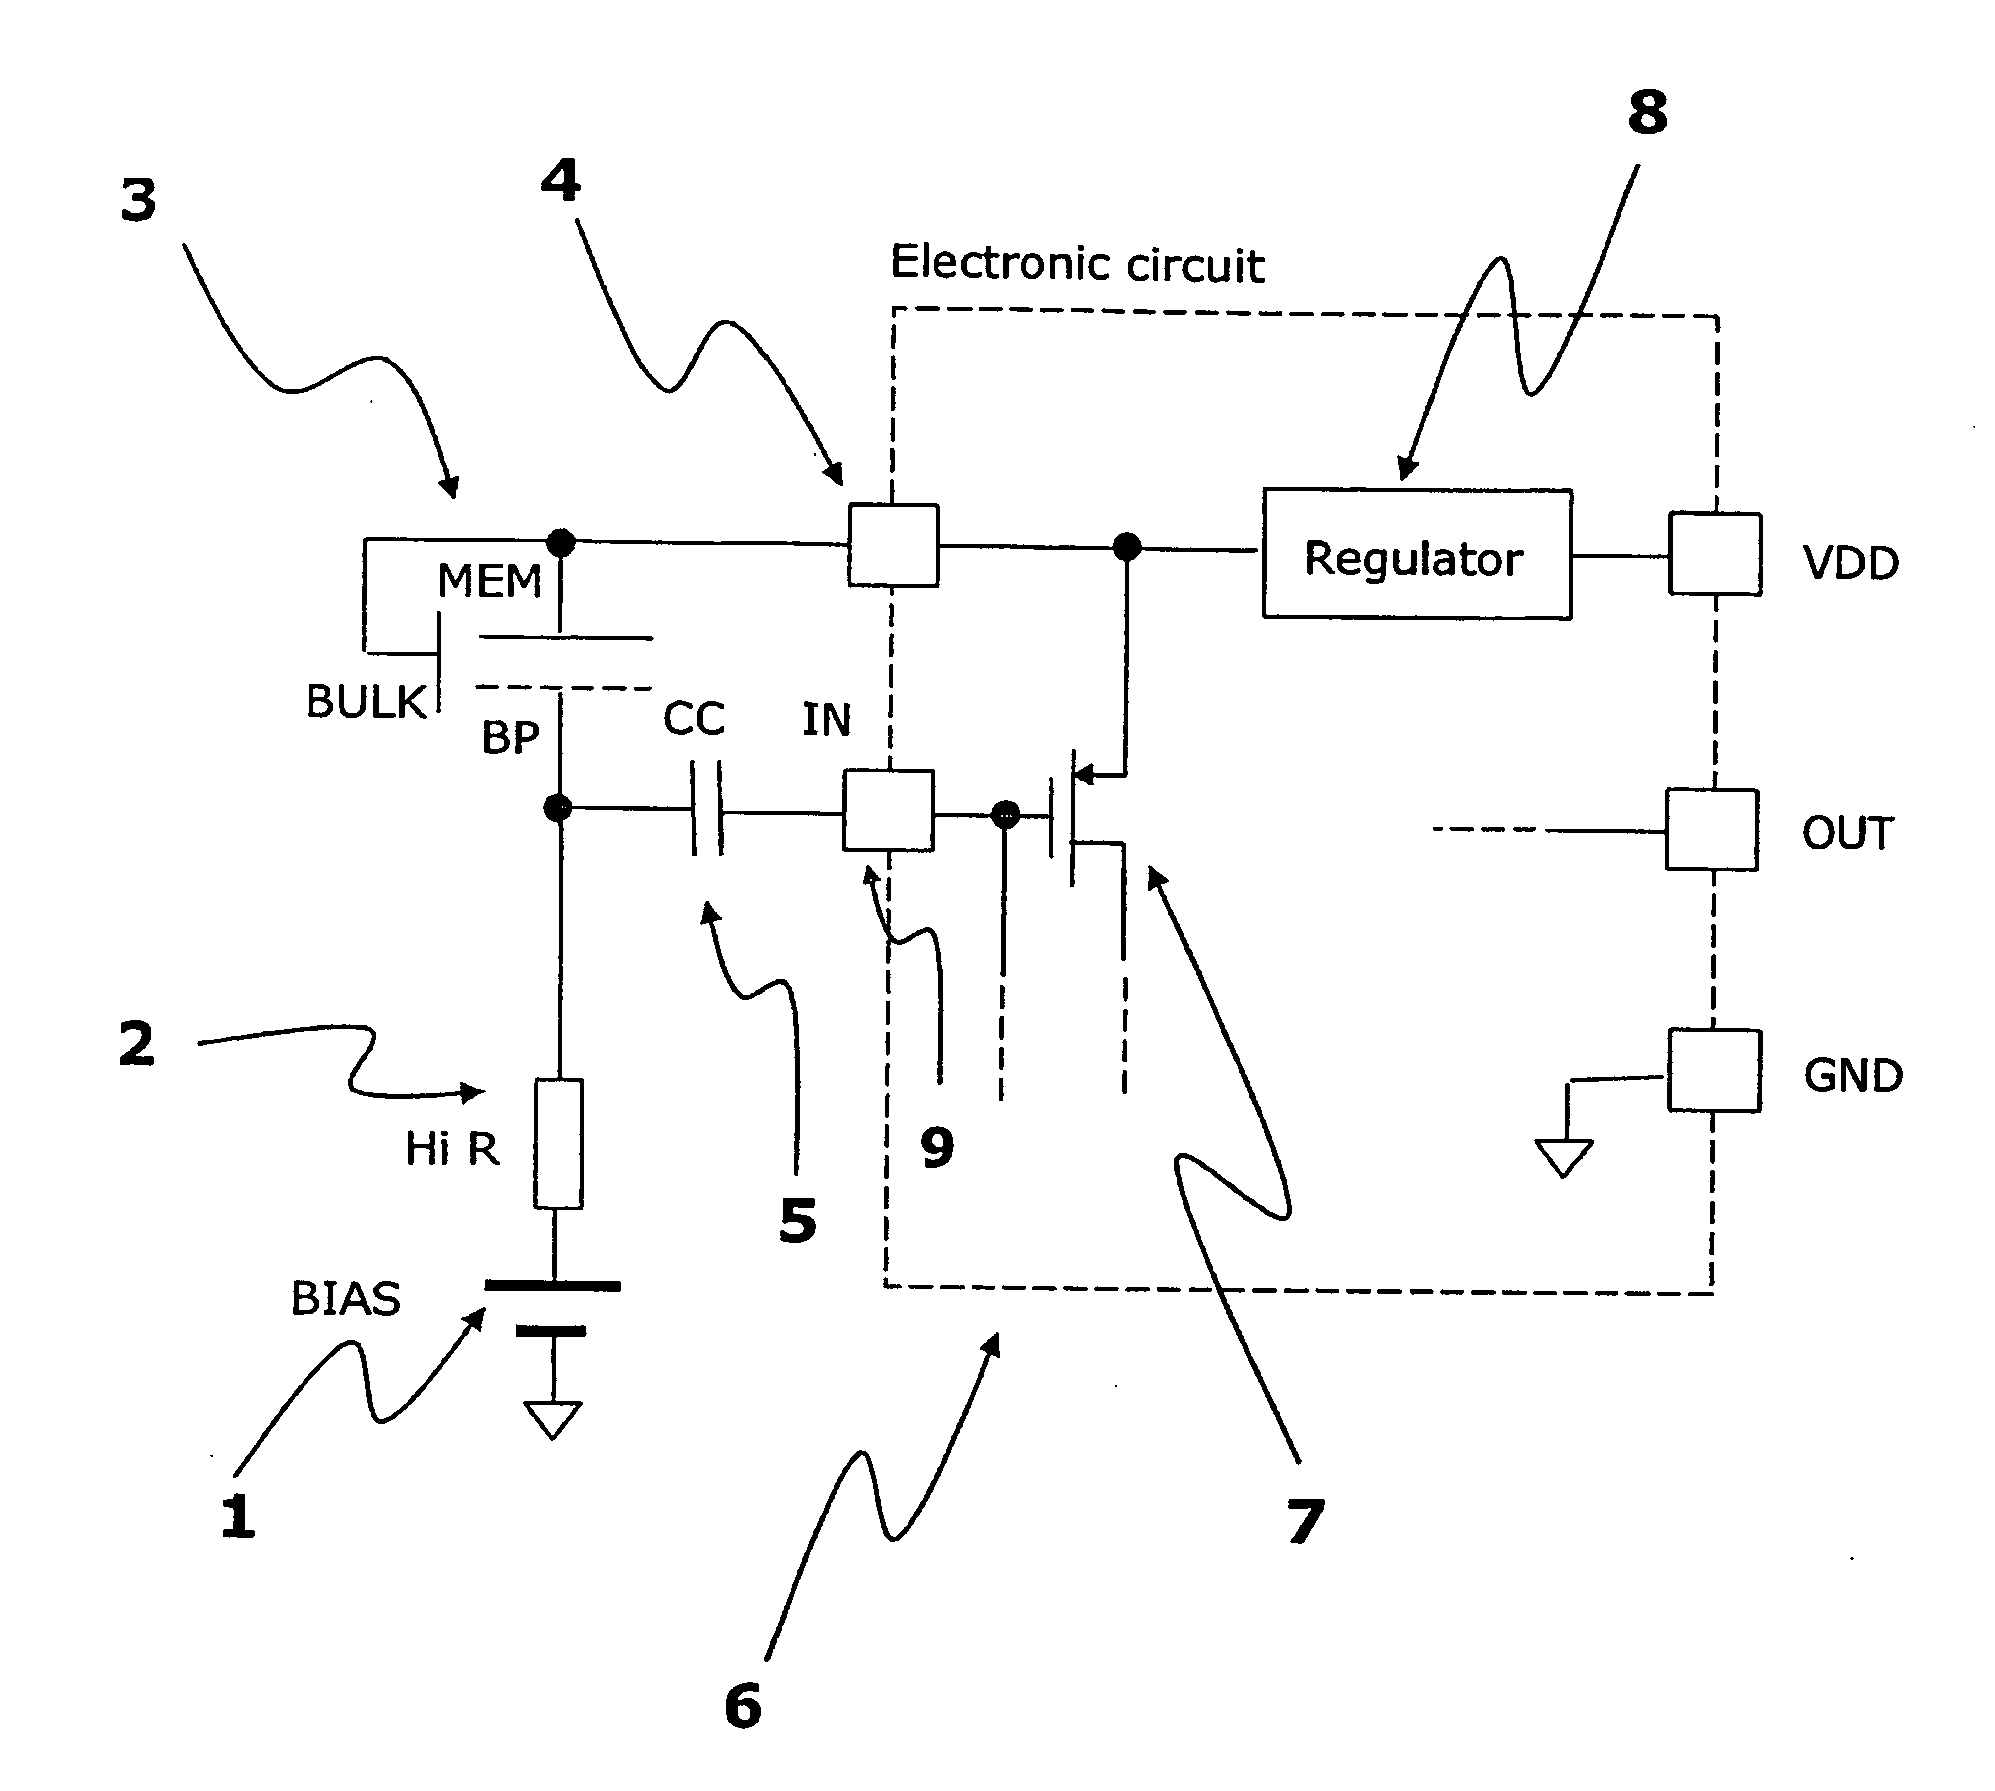 Microphone assembly with P-type preamplifier input stage